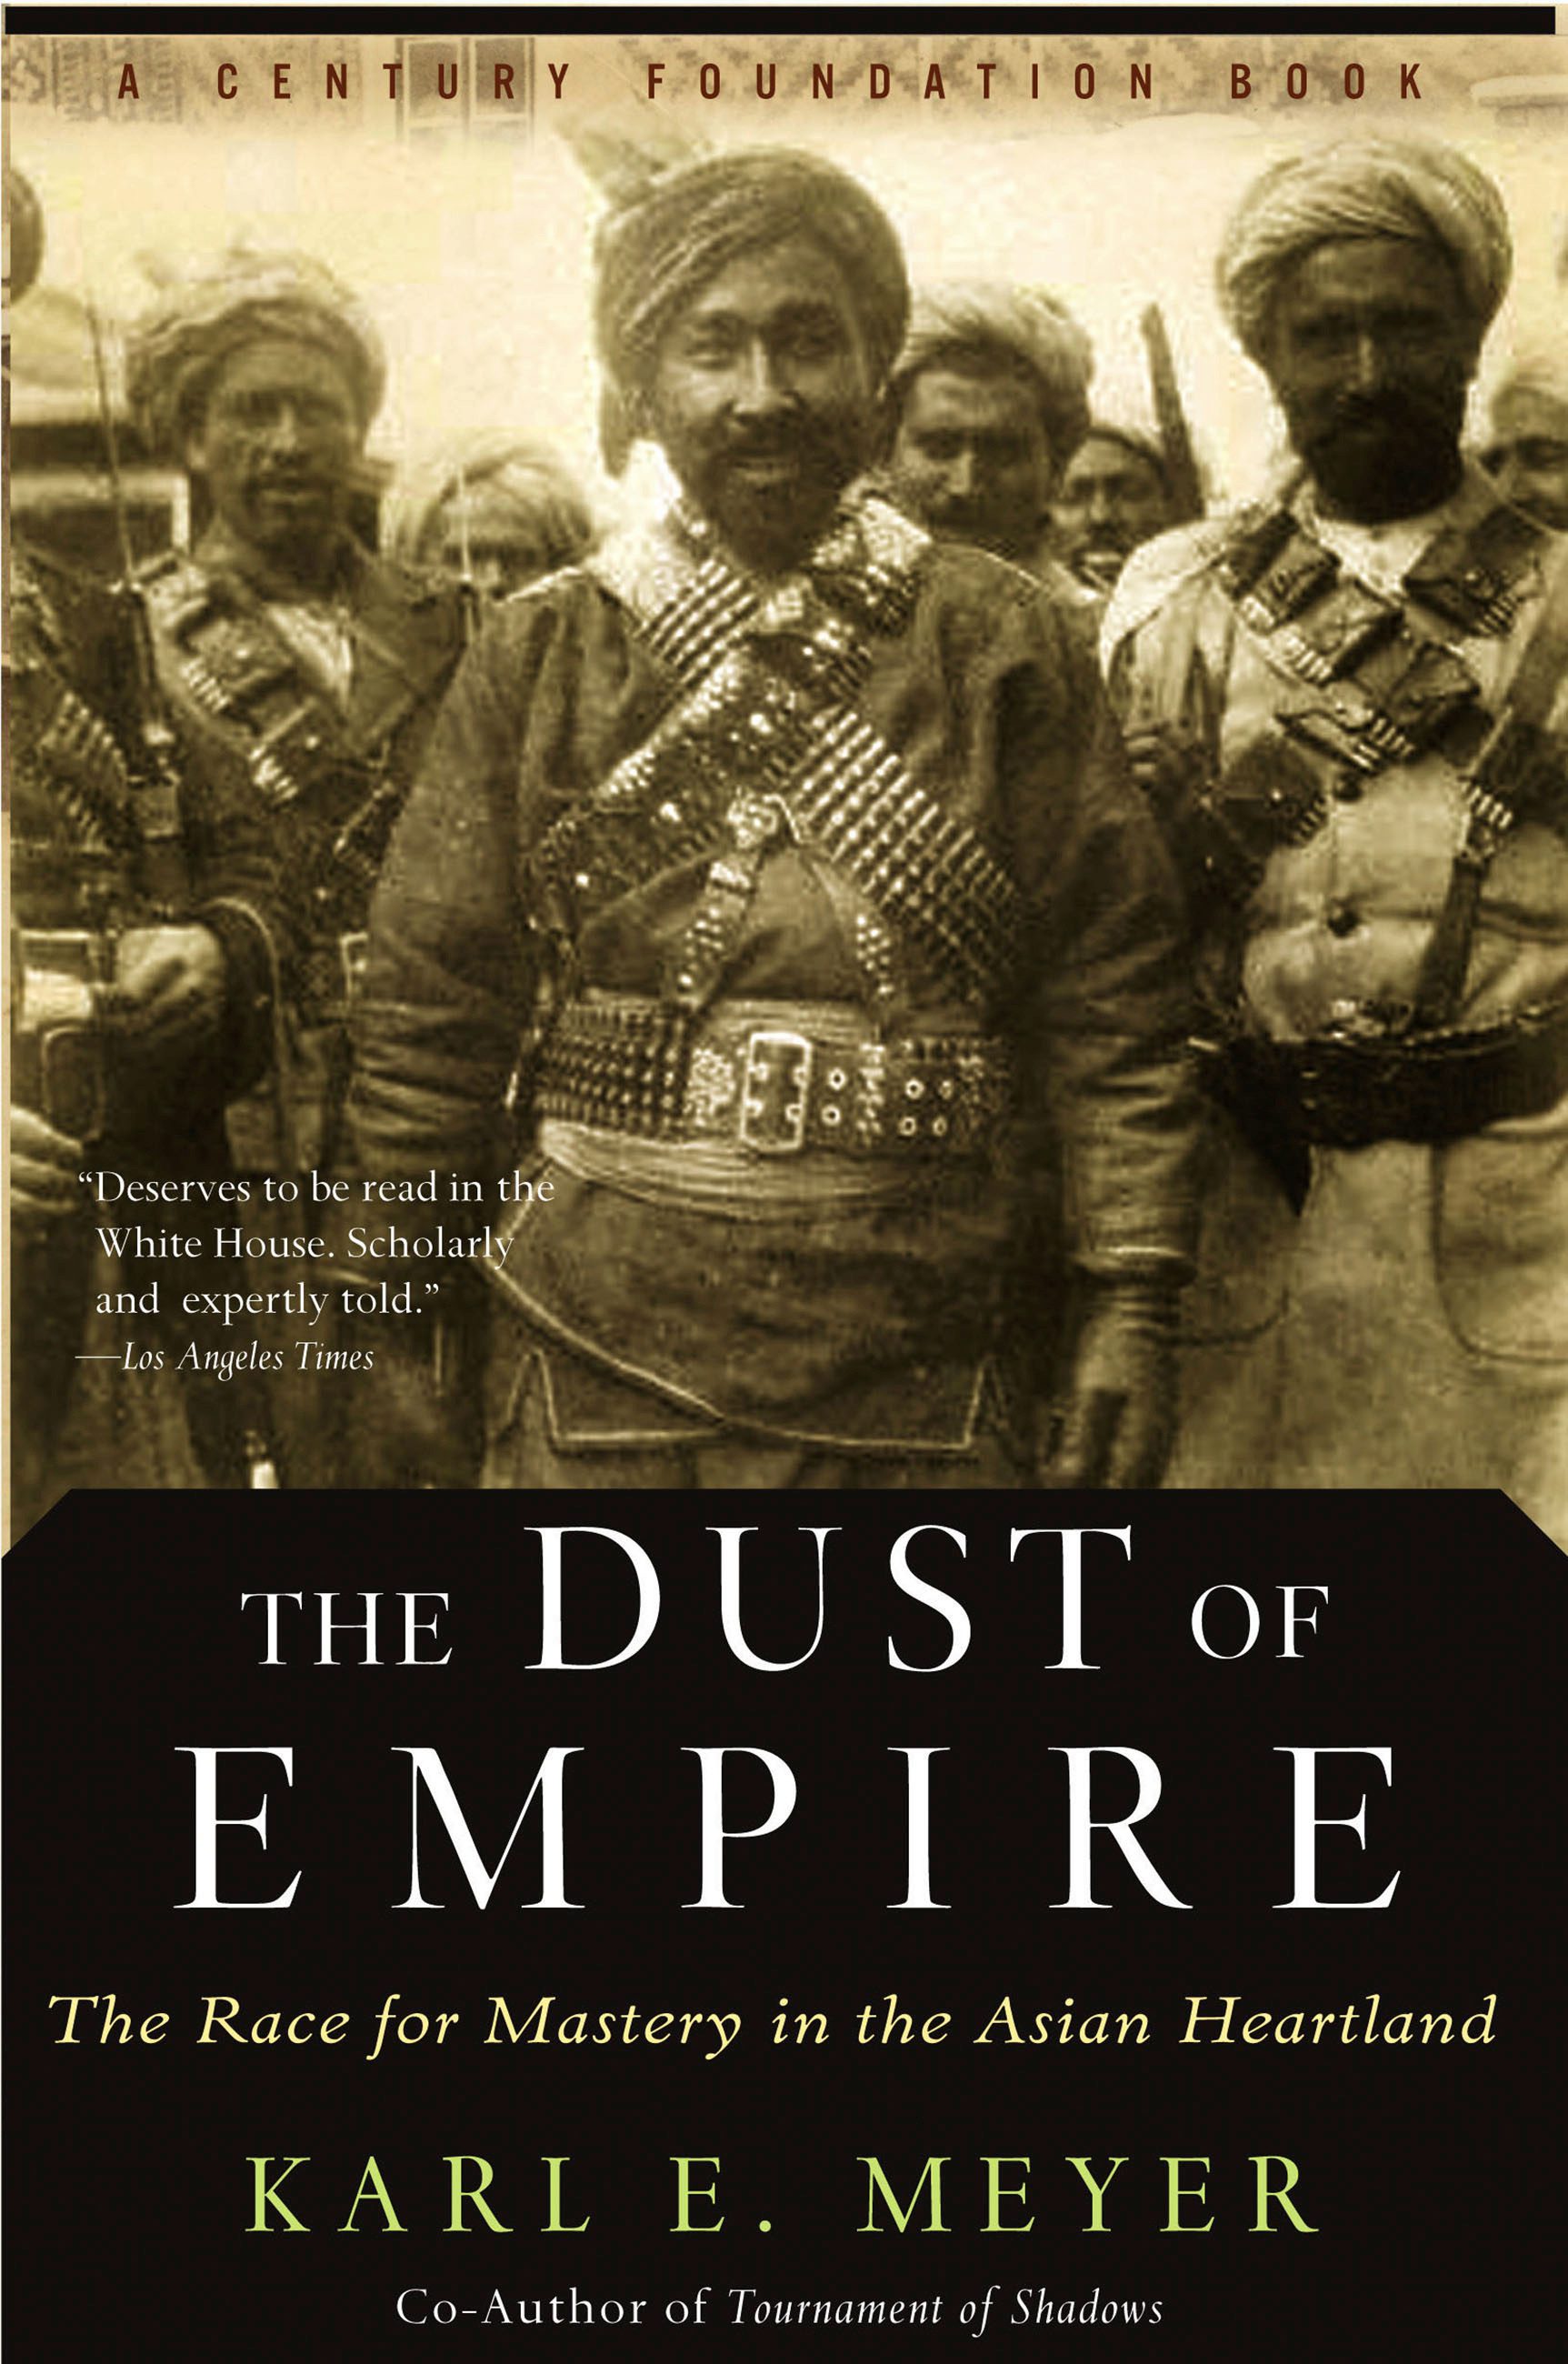 a black and white image of men and women, dust of empire, Karl E. Meyer